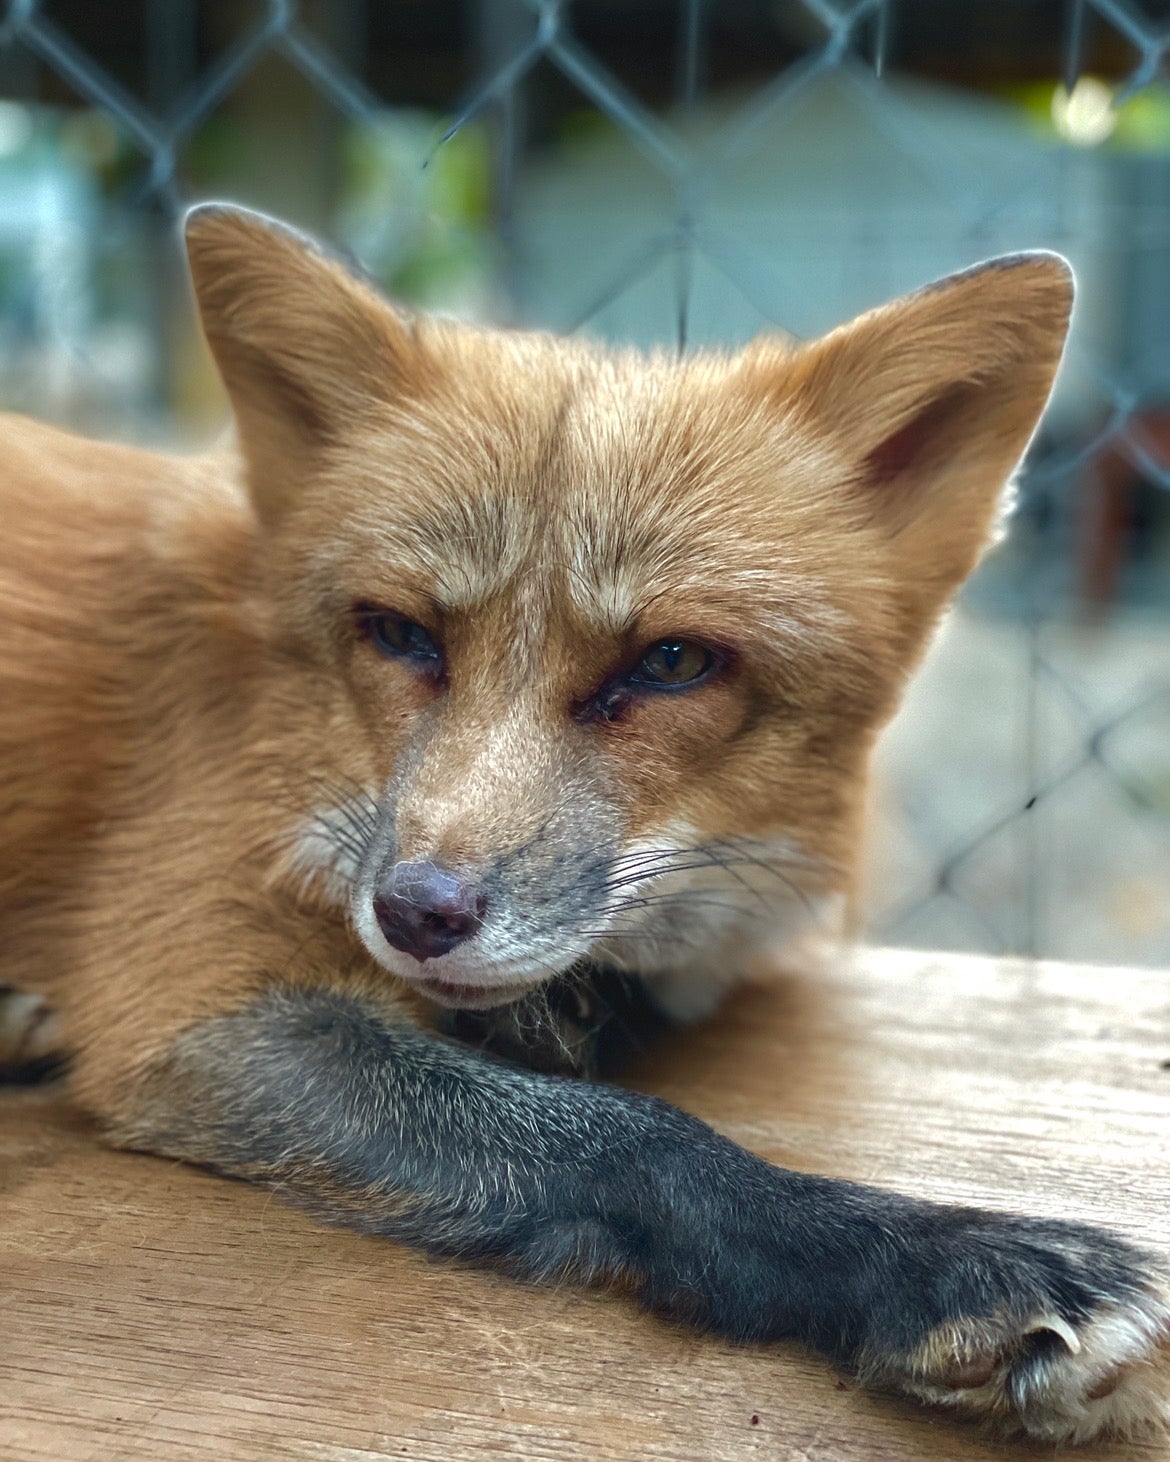 Penny the fox (Collect/PA Real Life)